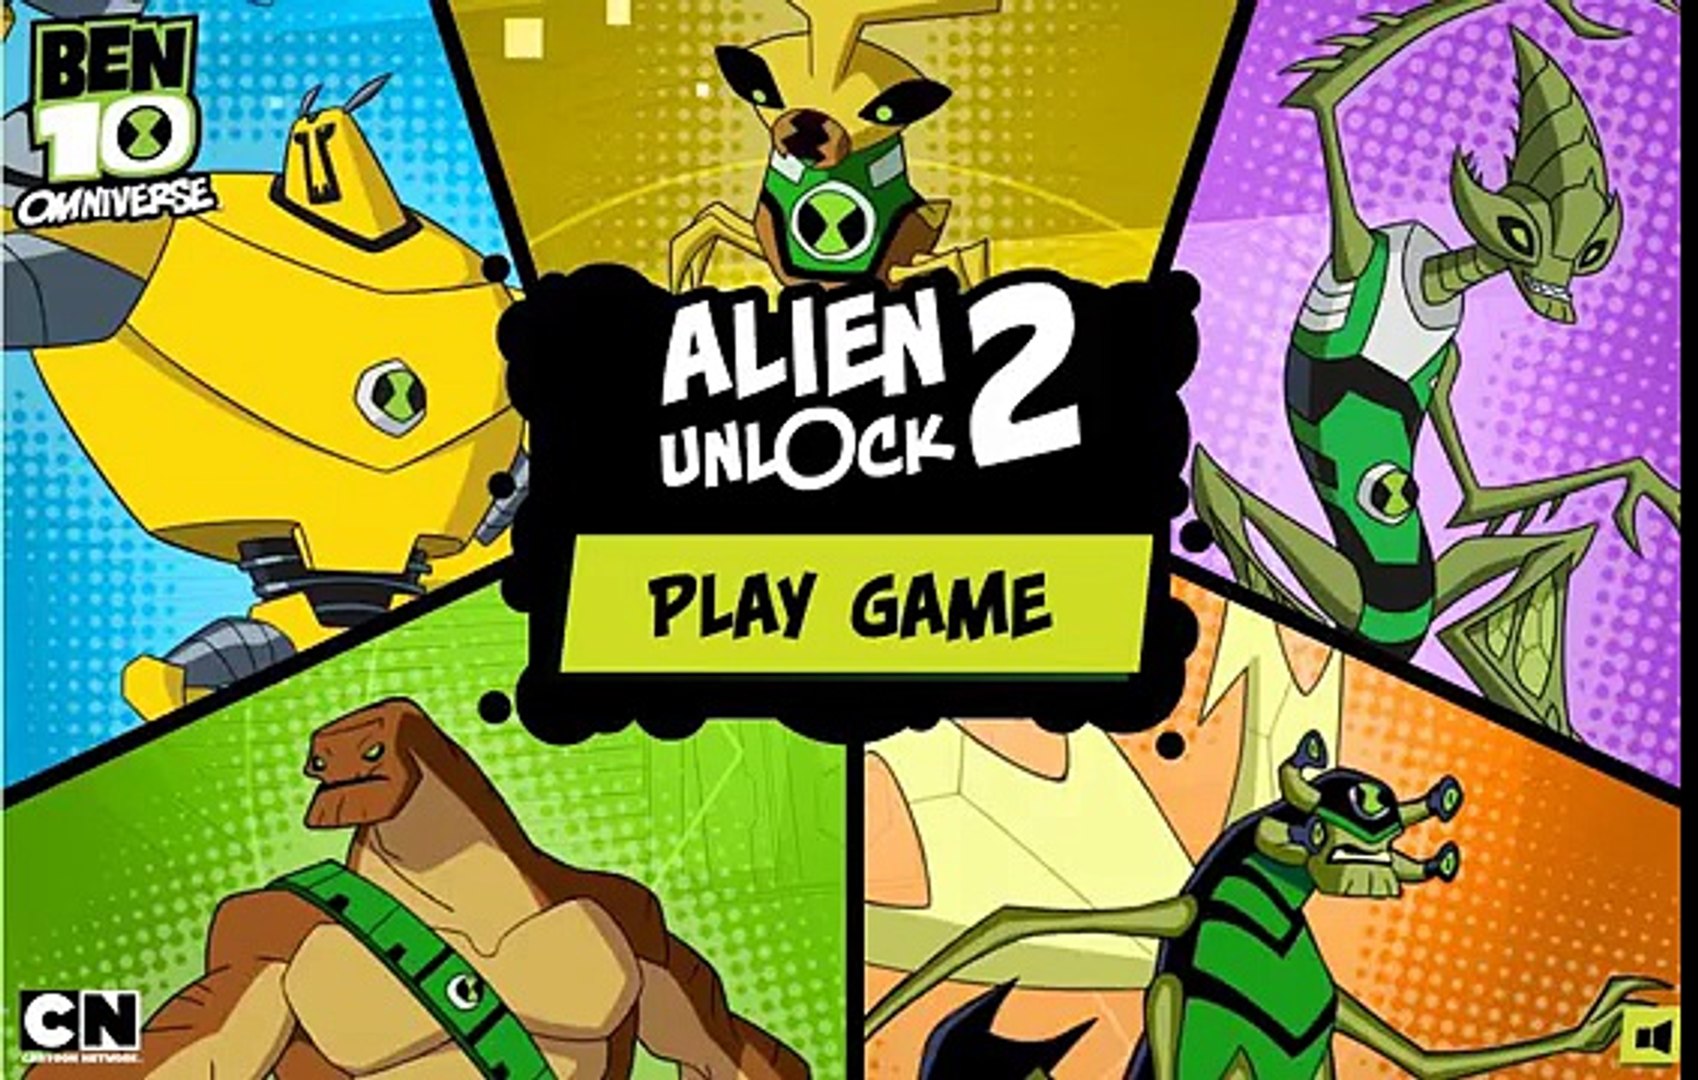 Ben 10 Ultimate Alien: The Ultimate Collection - Easy Mode Completed (Cartoon  Network Games) 